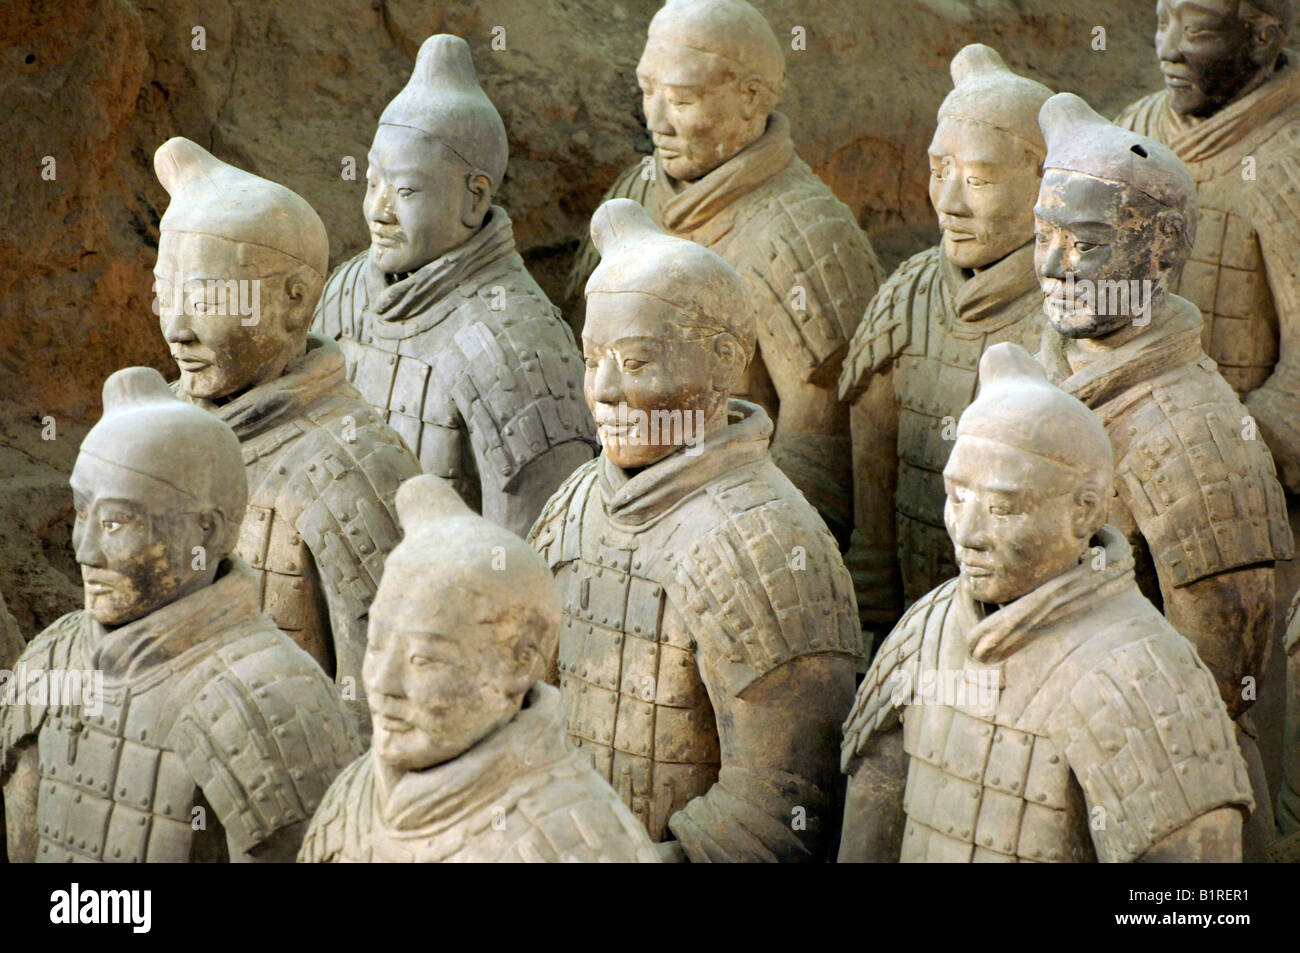 Terracotta Army, Warriors, part of the tomb complex, Pit 1, mausoleum of the first Qin Emperor near Xi'an, Shaanxi Province, Ch Stock Photo